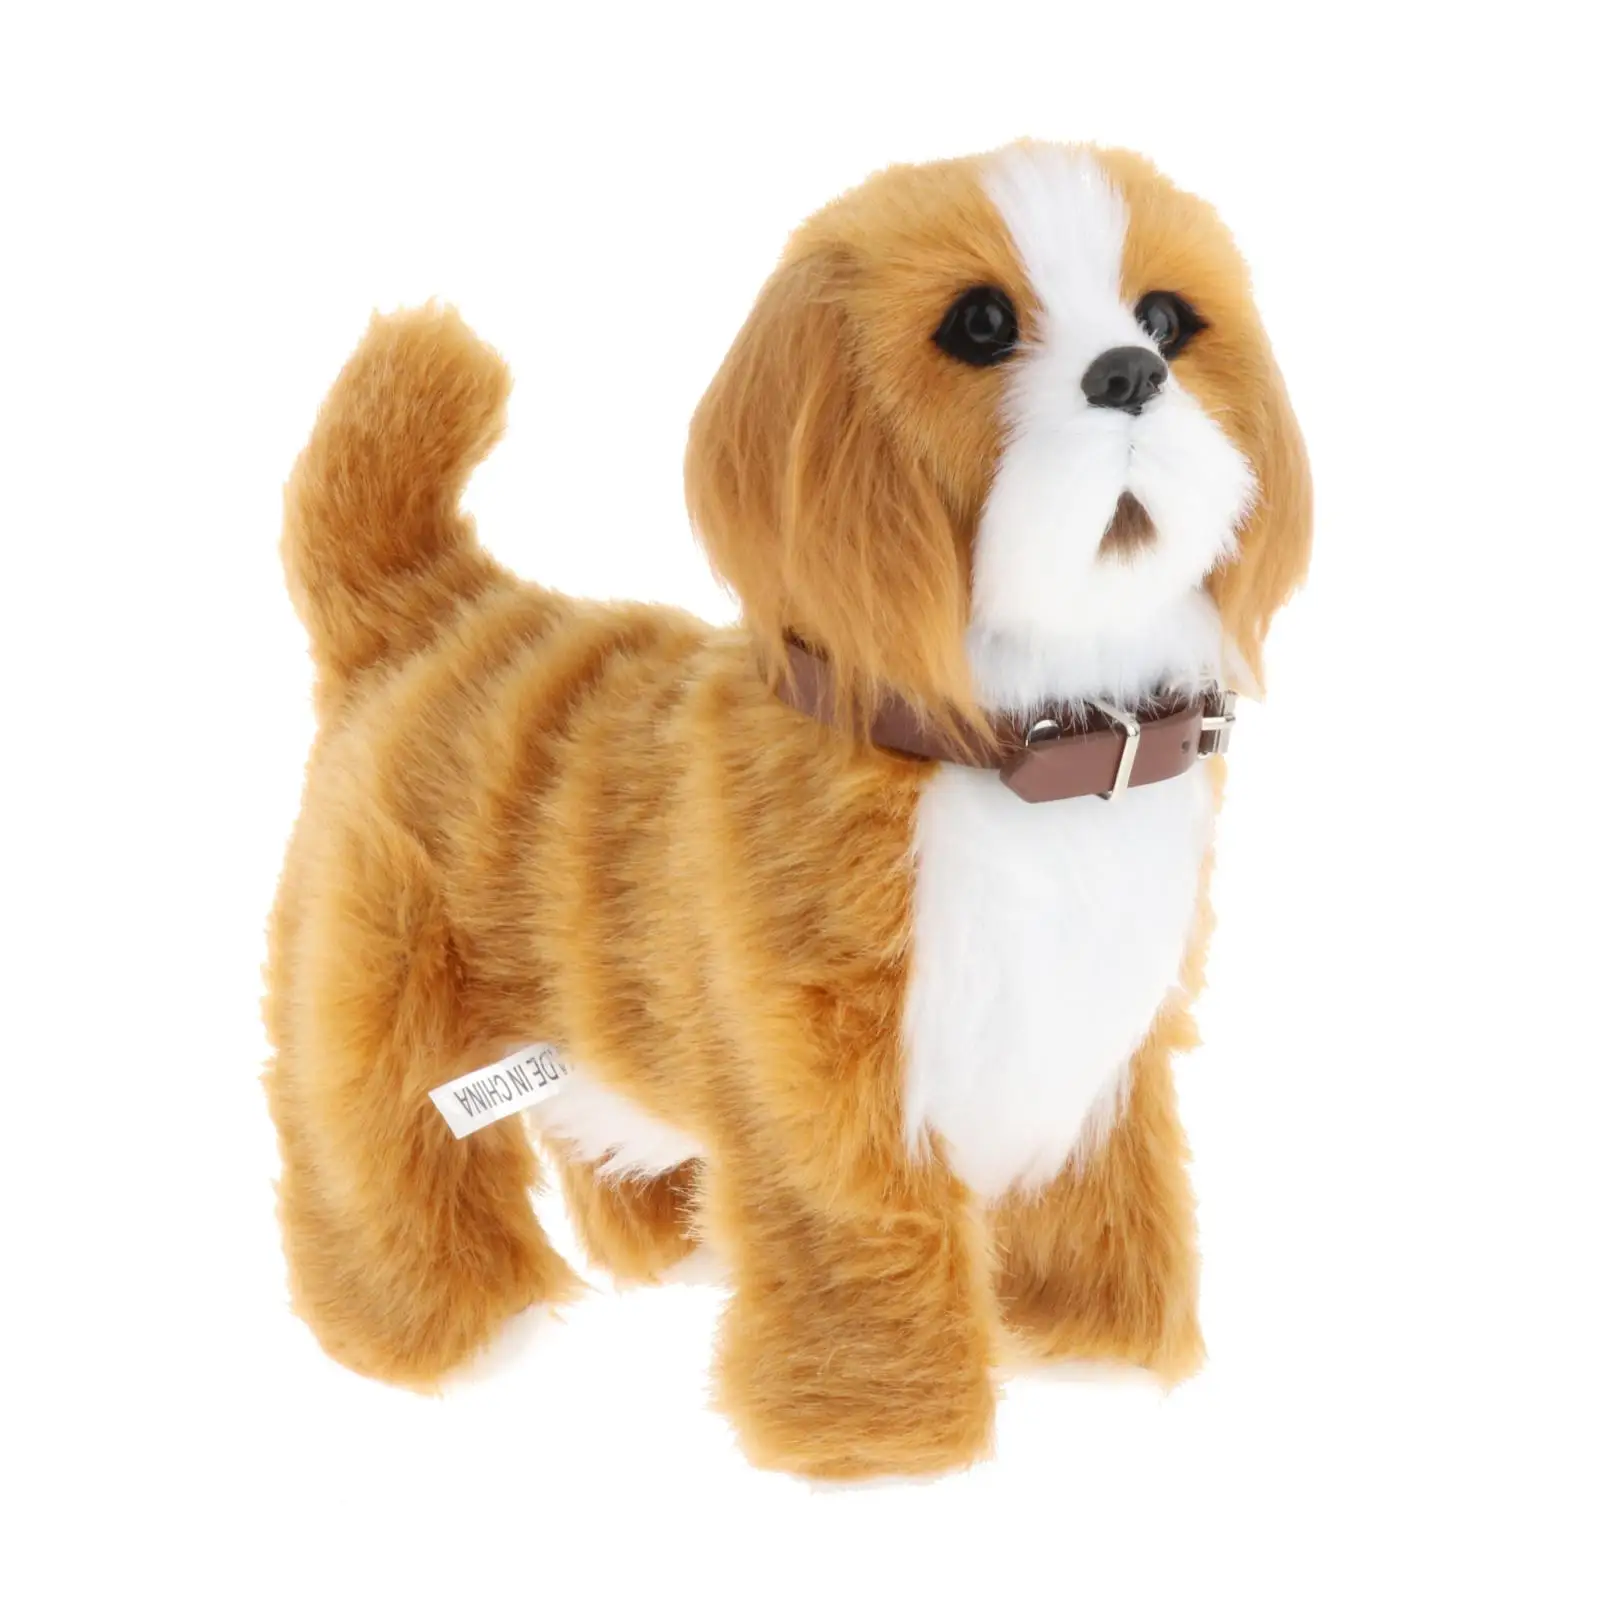 Electronic Pet Plush Toy Interactive Learning Battery Operated Walking Dog Toy Stuffed Animals Doll for New Years Gifts